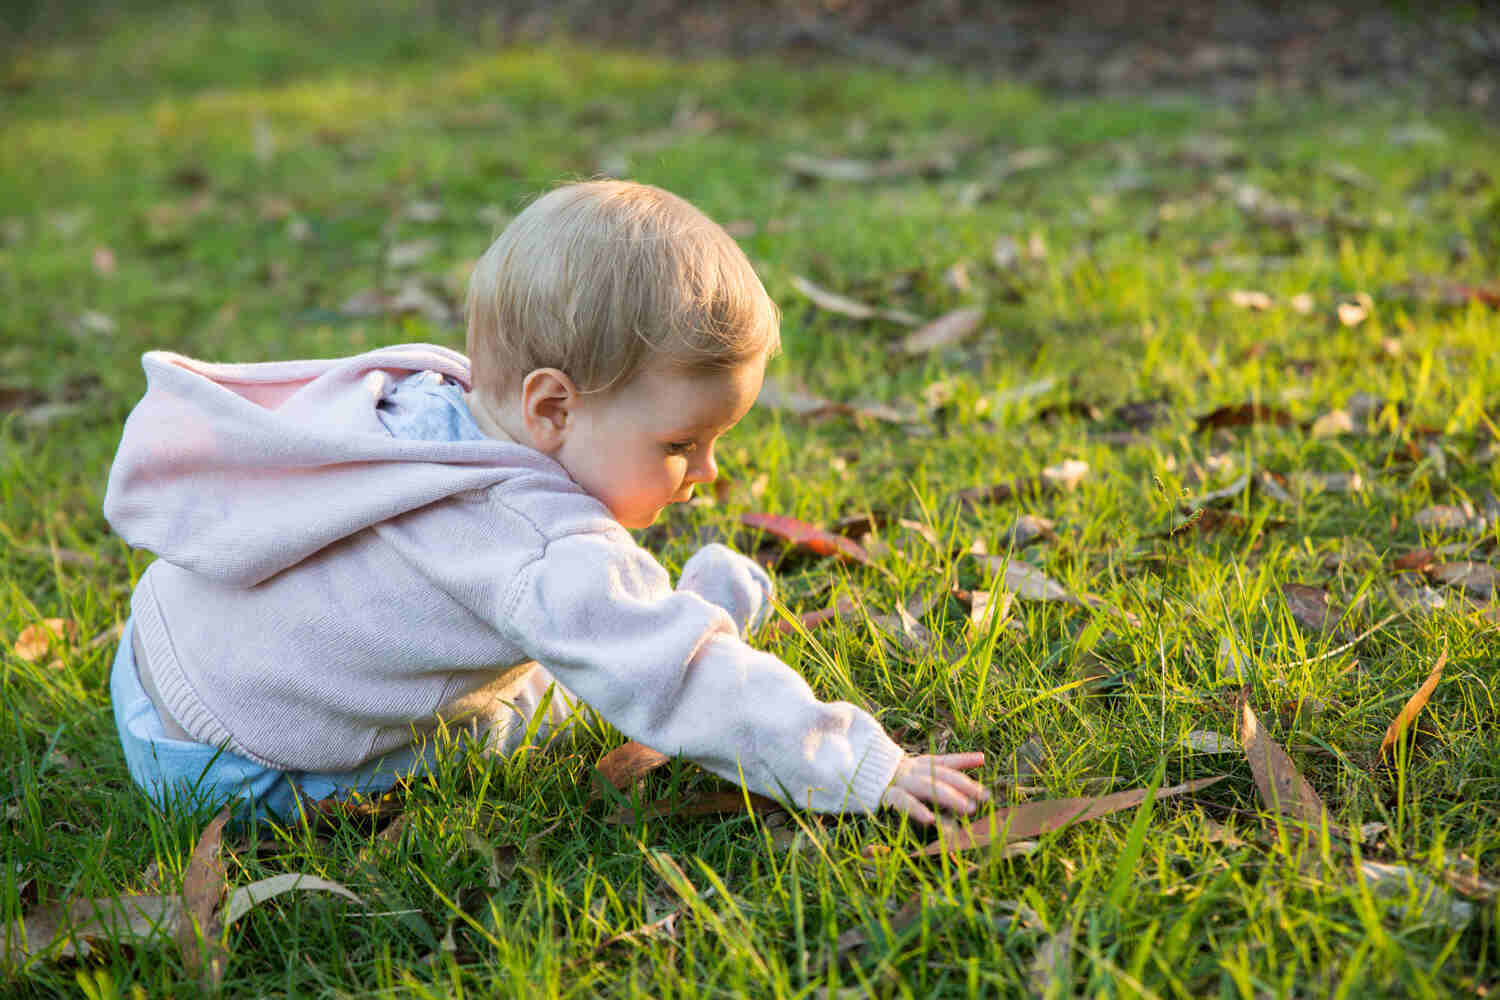 A toddler picking something from the grass